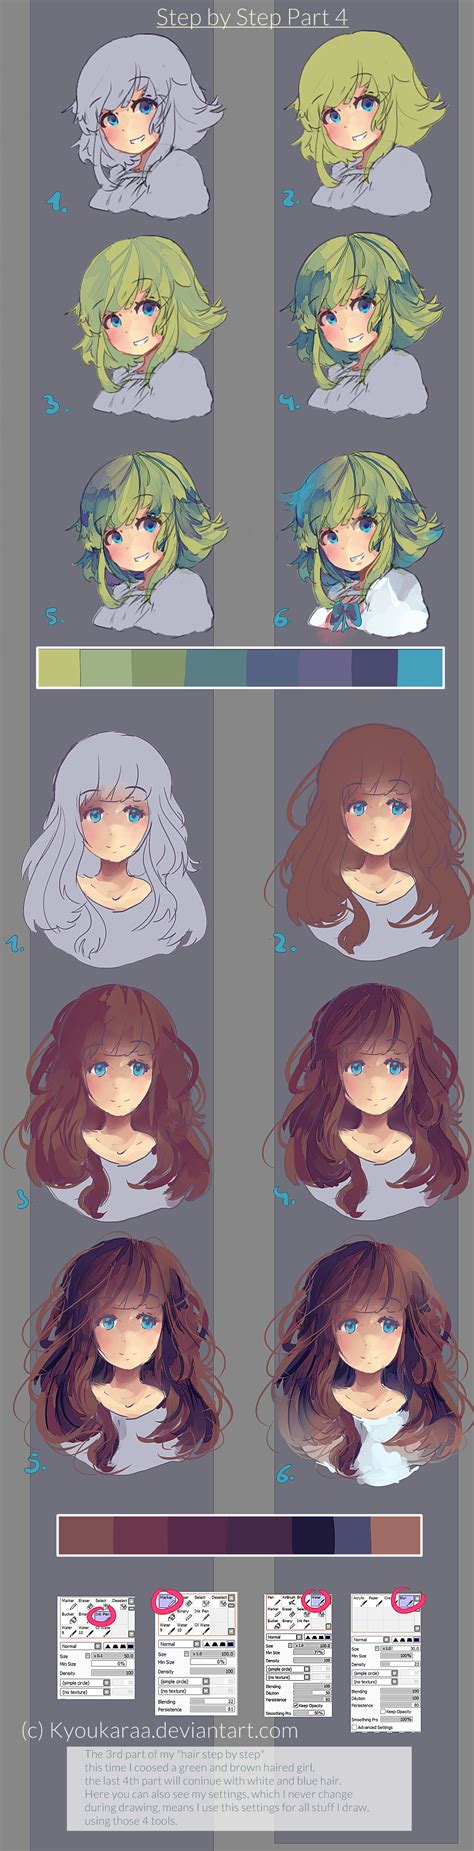 Step by Step Hair Part 3 by KyouKaraa on DeviantArt